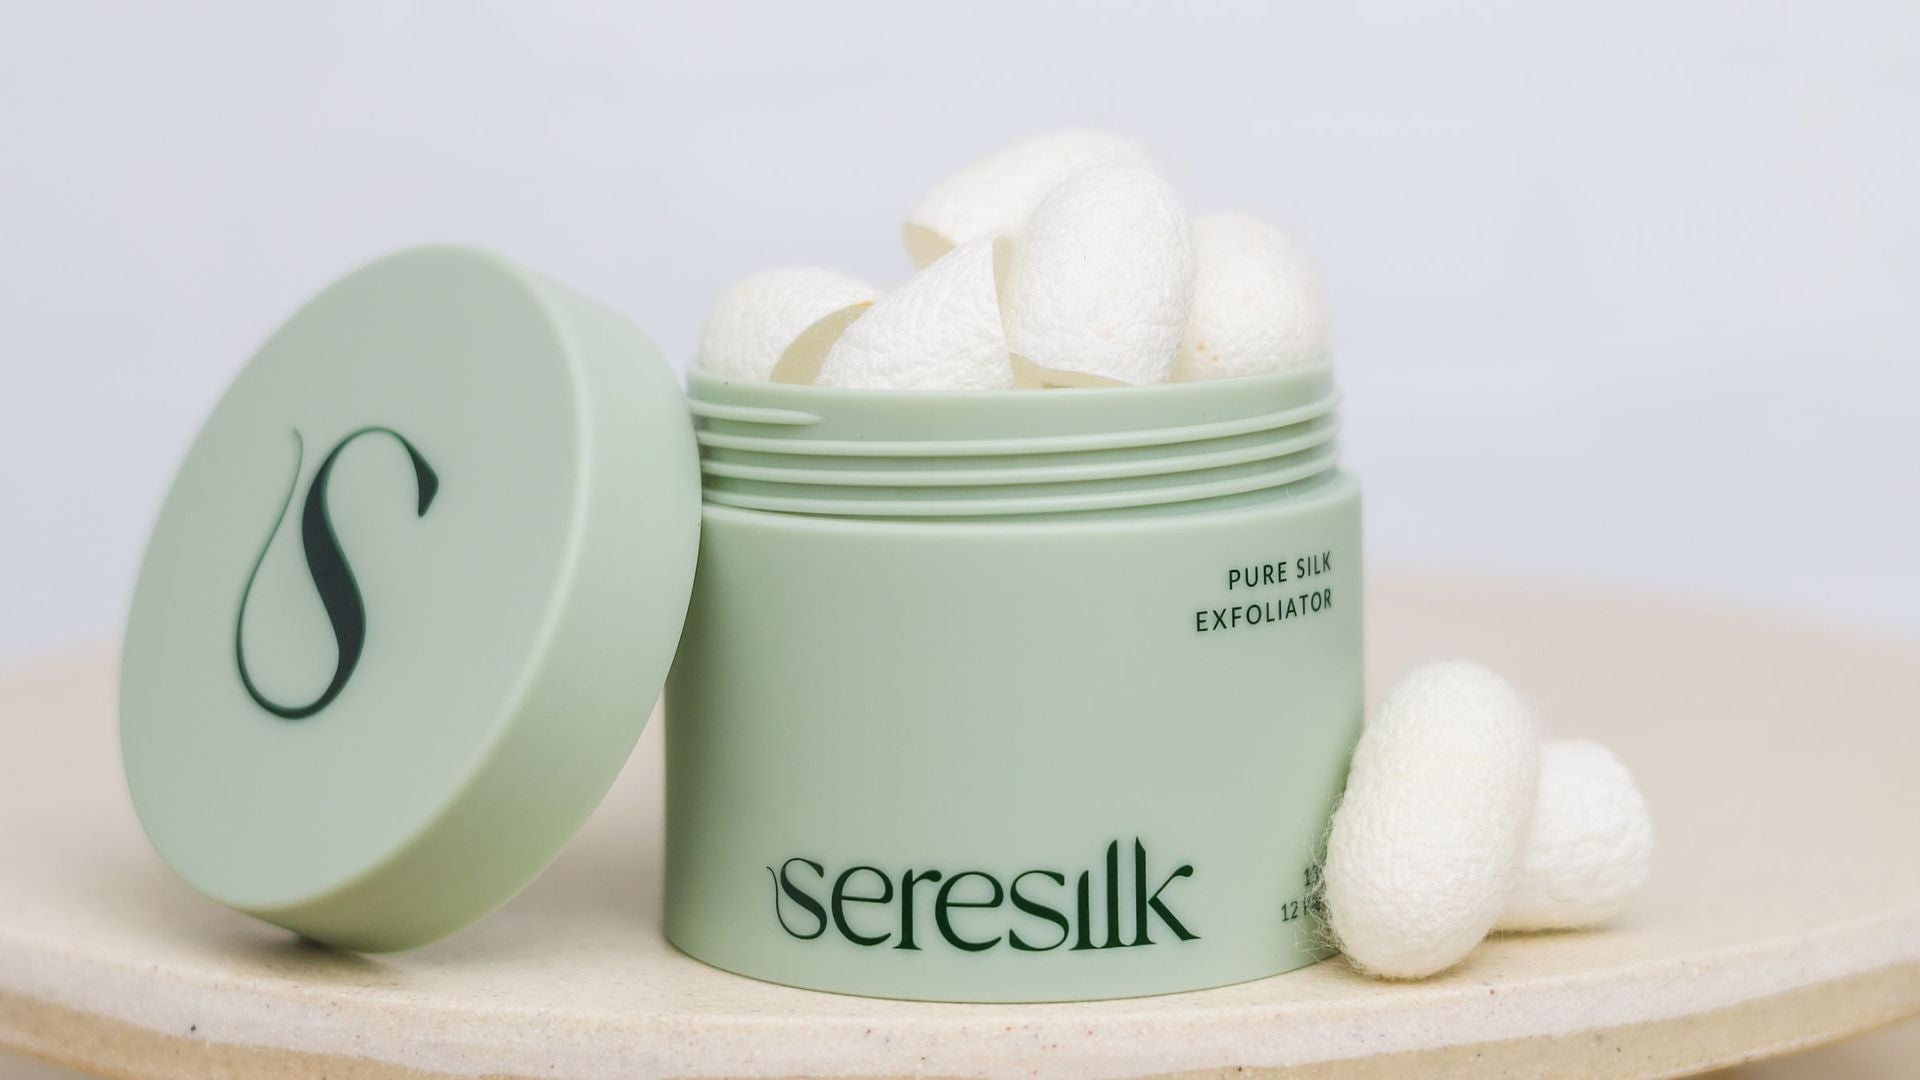 Body+Soul's Hottest Product of September: Seresilk Pure Silk Exfoliator